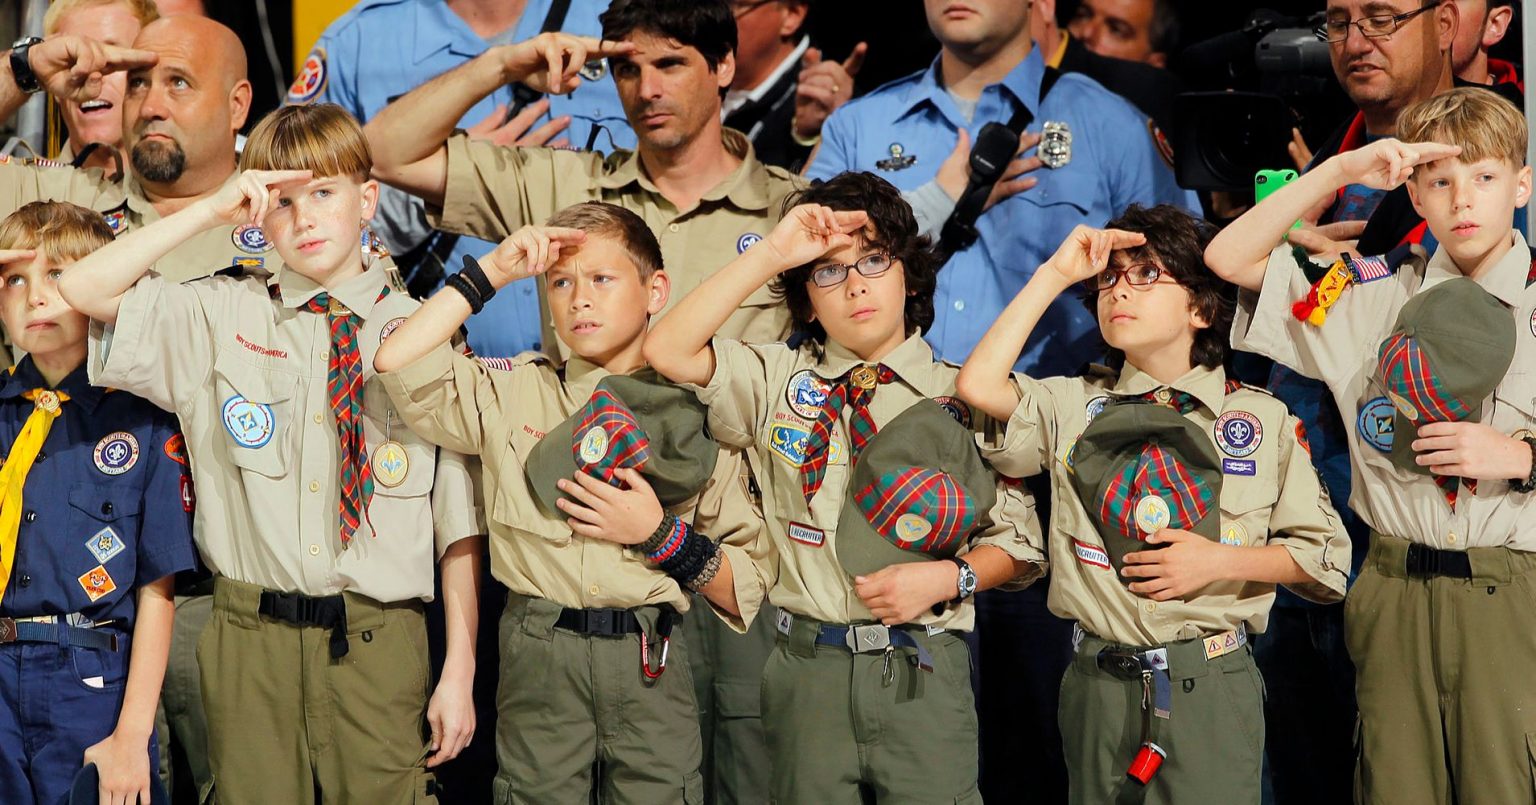 boy-scouts-girl-scouts-suffer-huge-declines-in-membership-ministrywatch